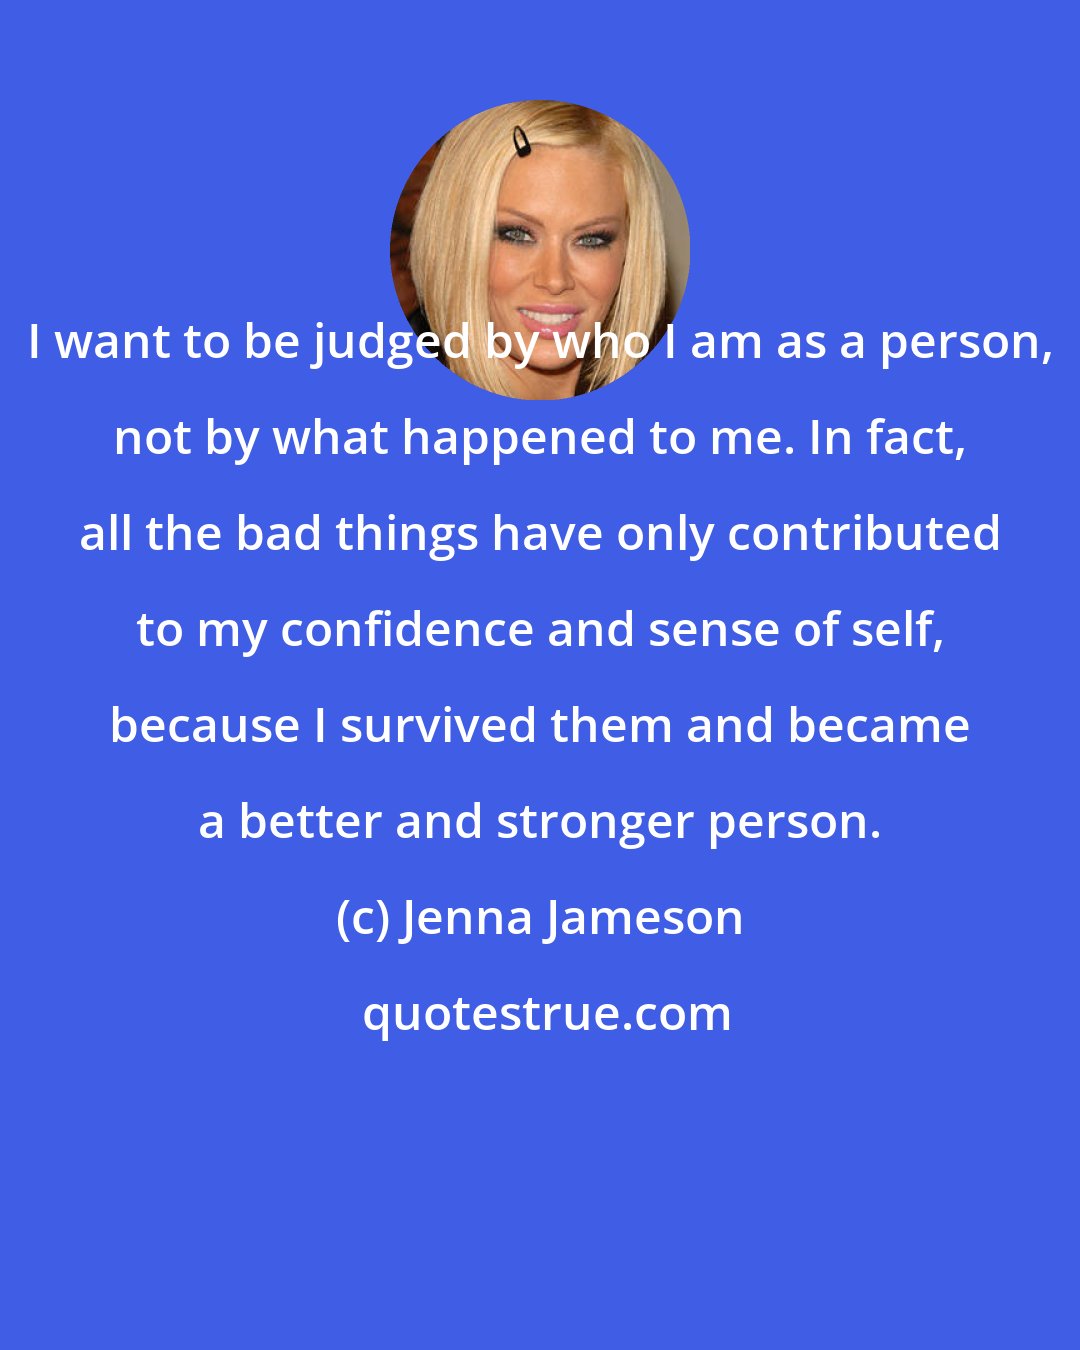 Jenna Jameson: I want to be judged by who I am as a person, not by what happened to me. In fact, all the bad things have only contributed to my confidence and sense of self, because I survived them and became a better and stronger person.